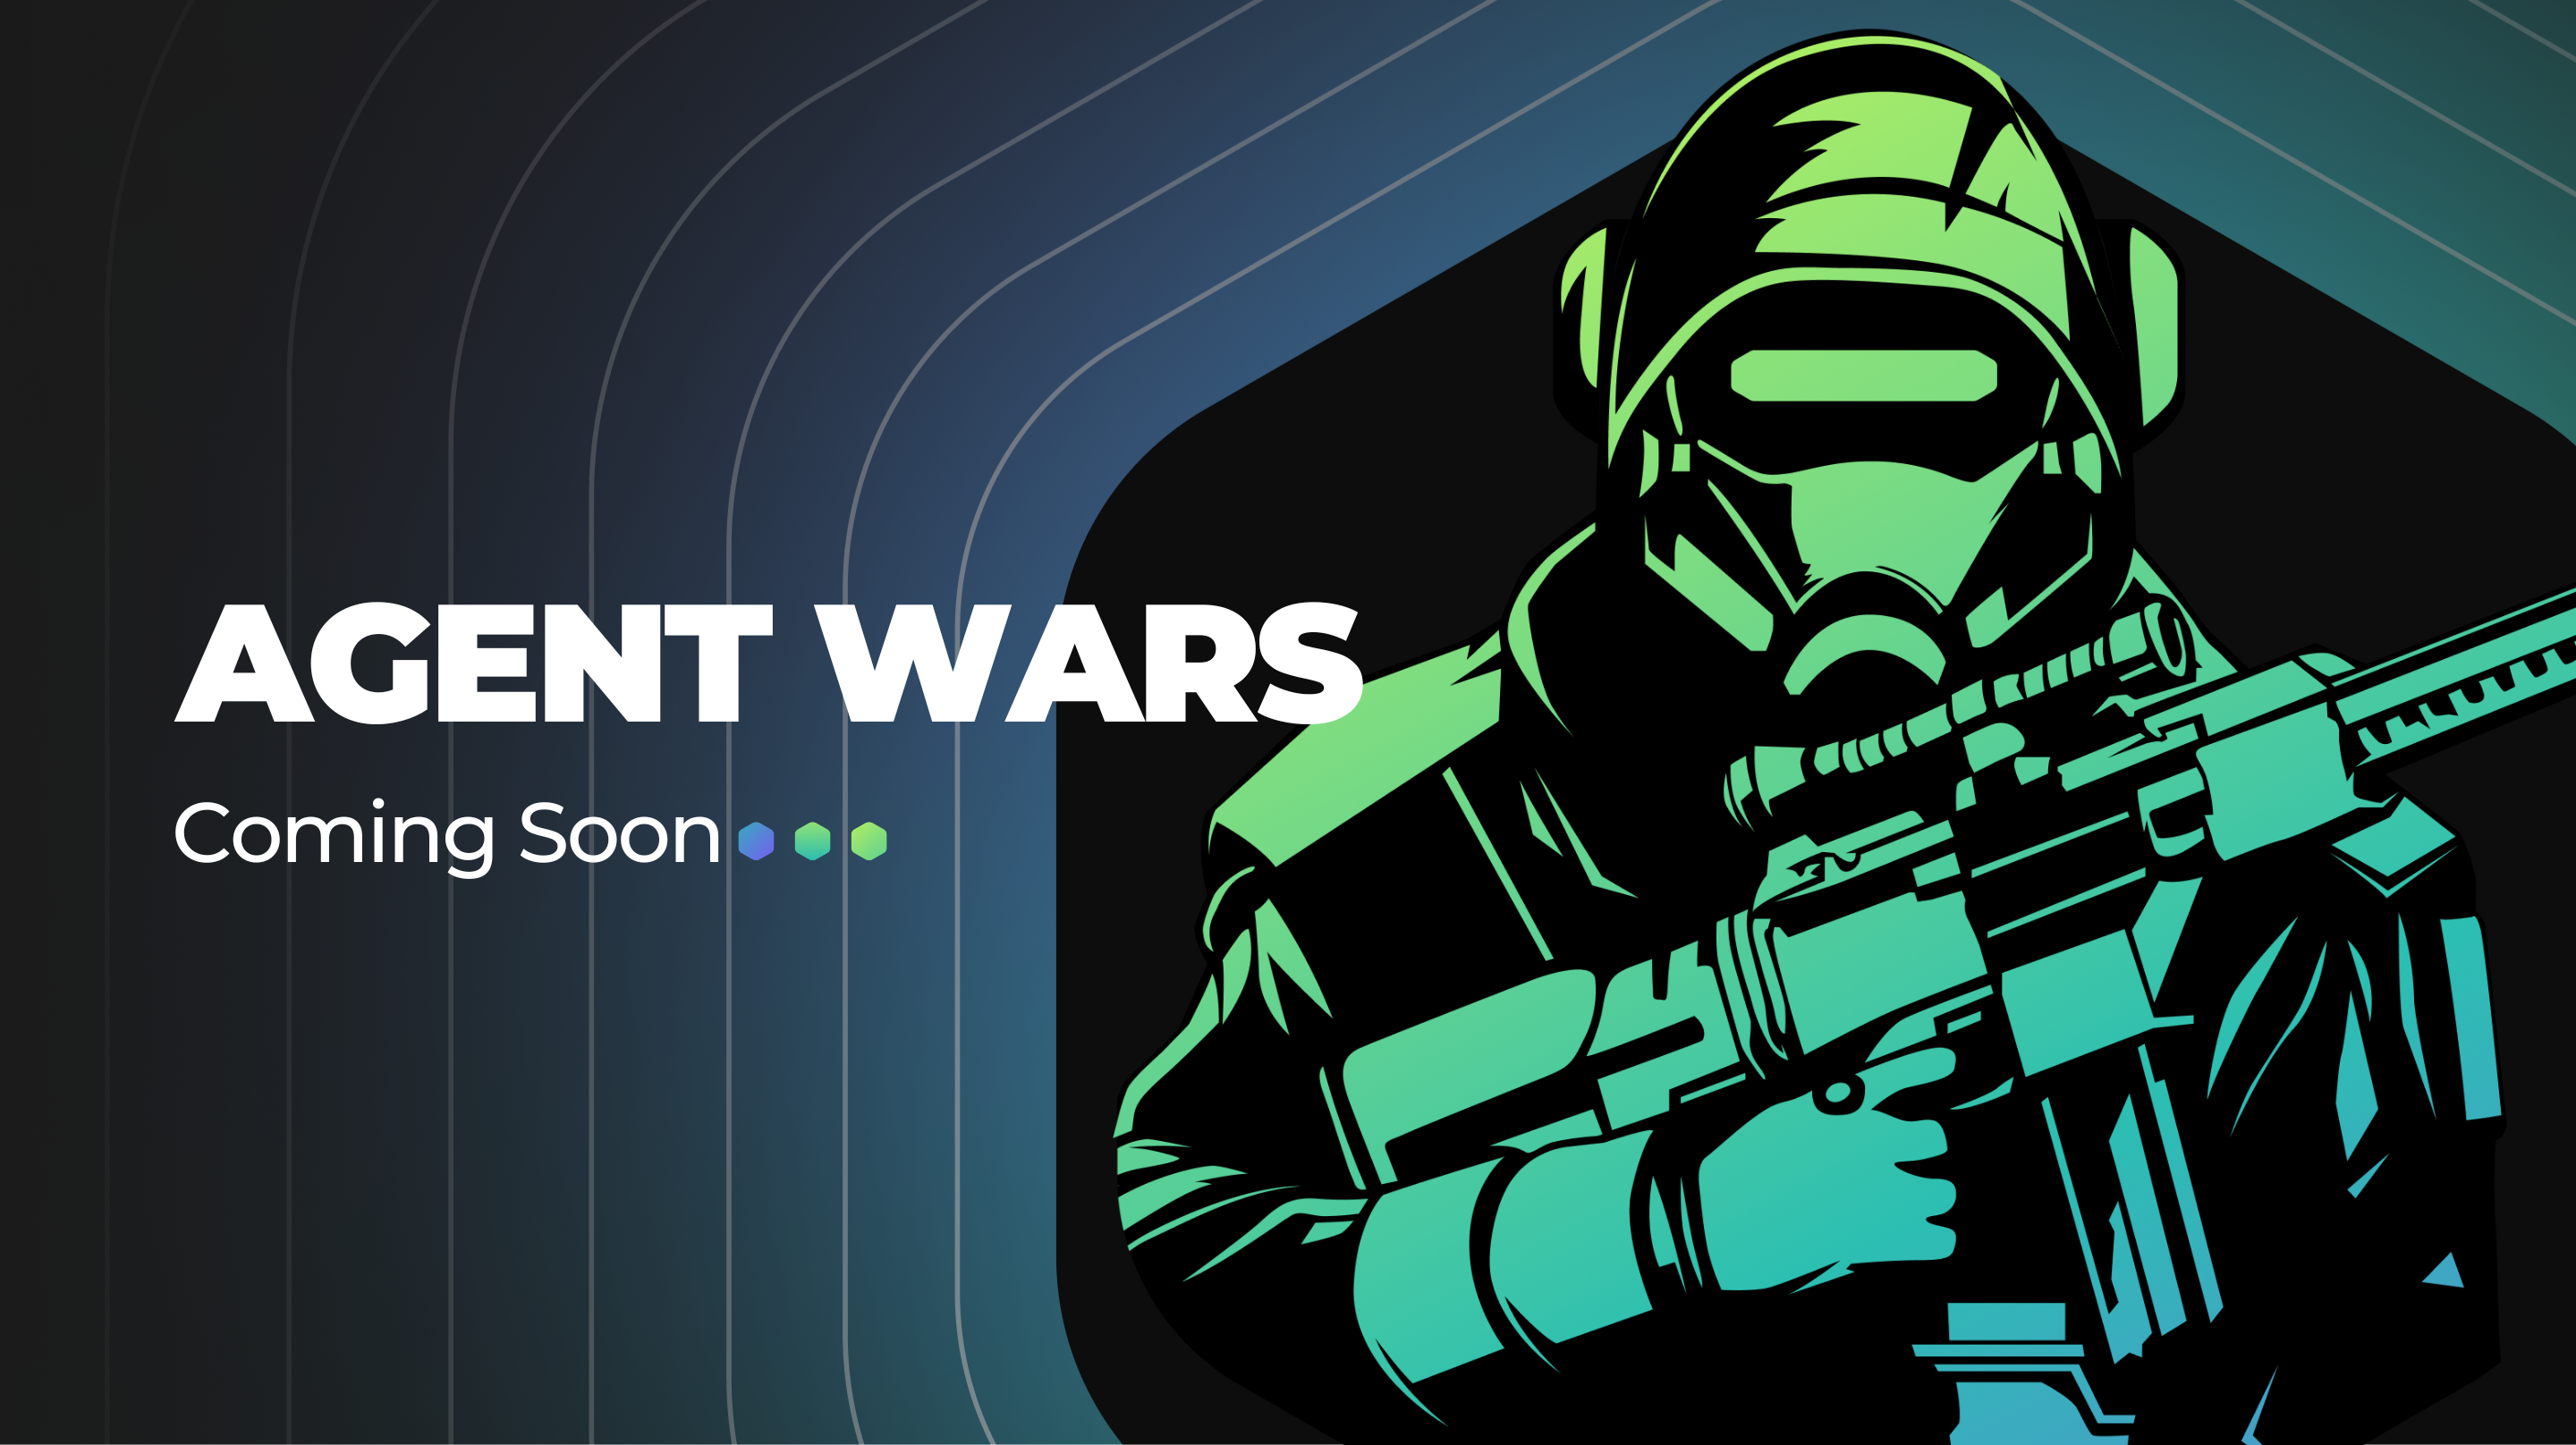 Introducing Agent Wars